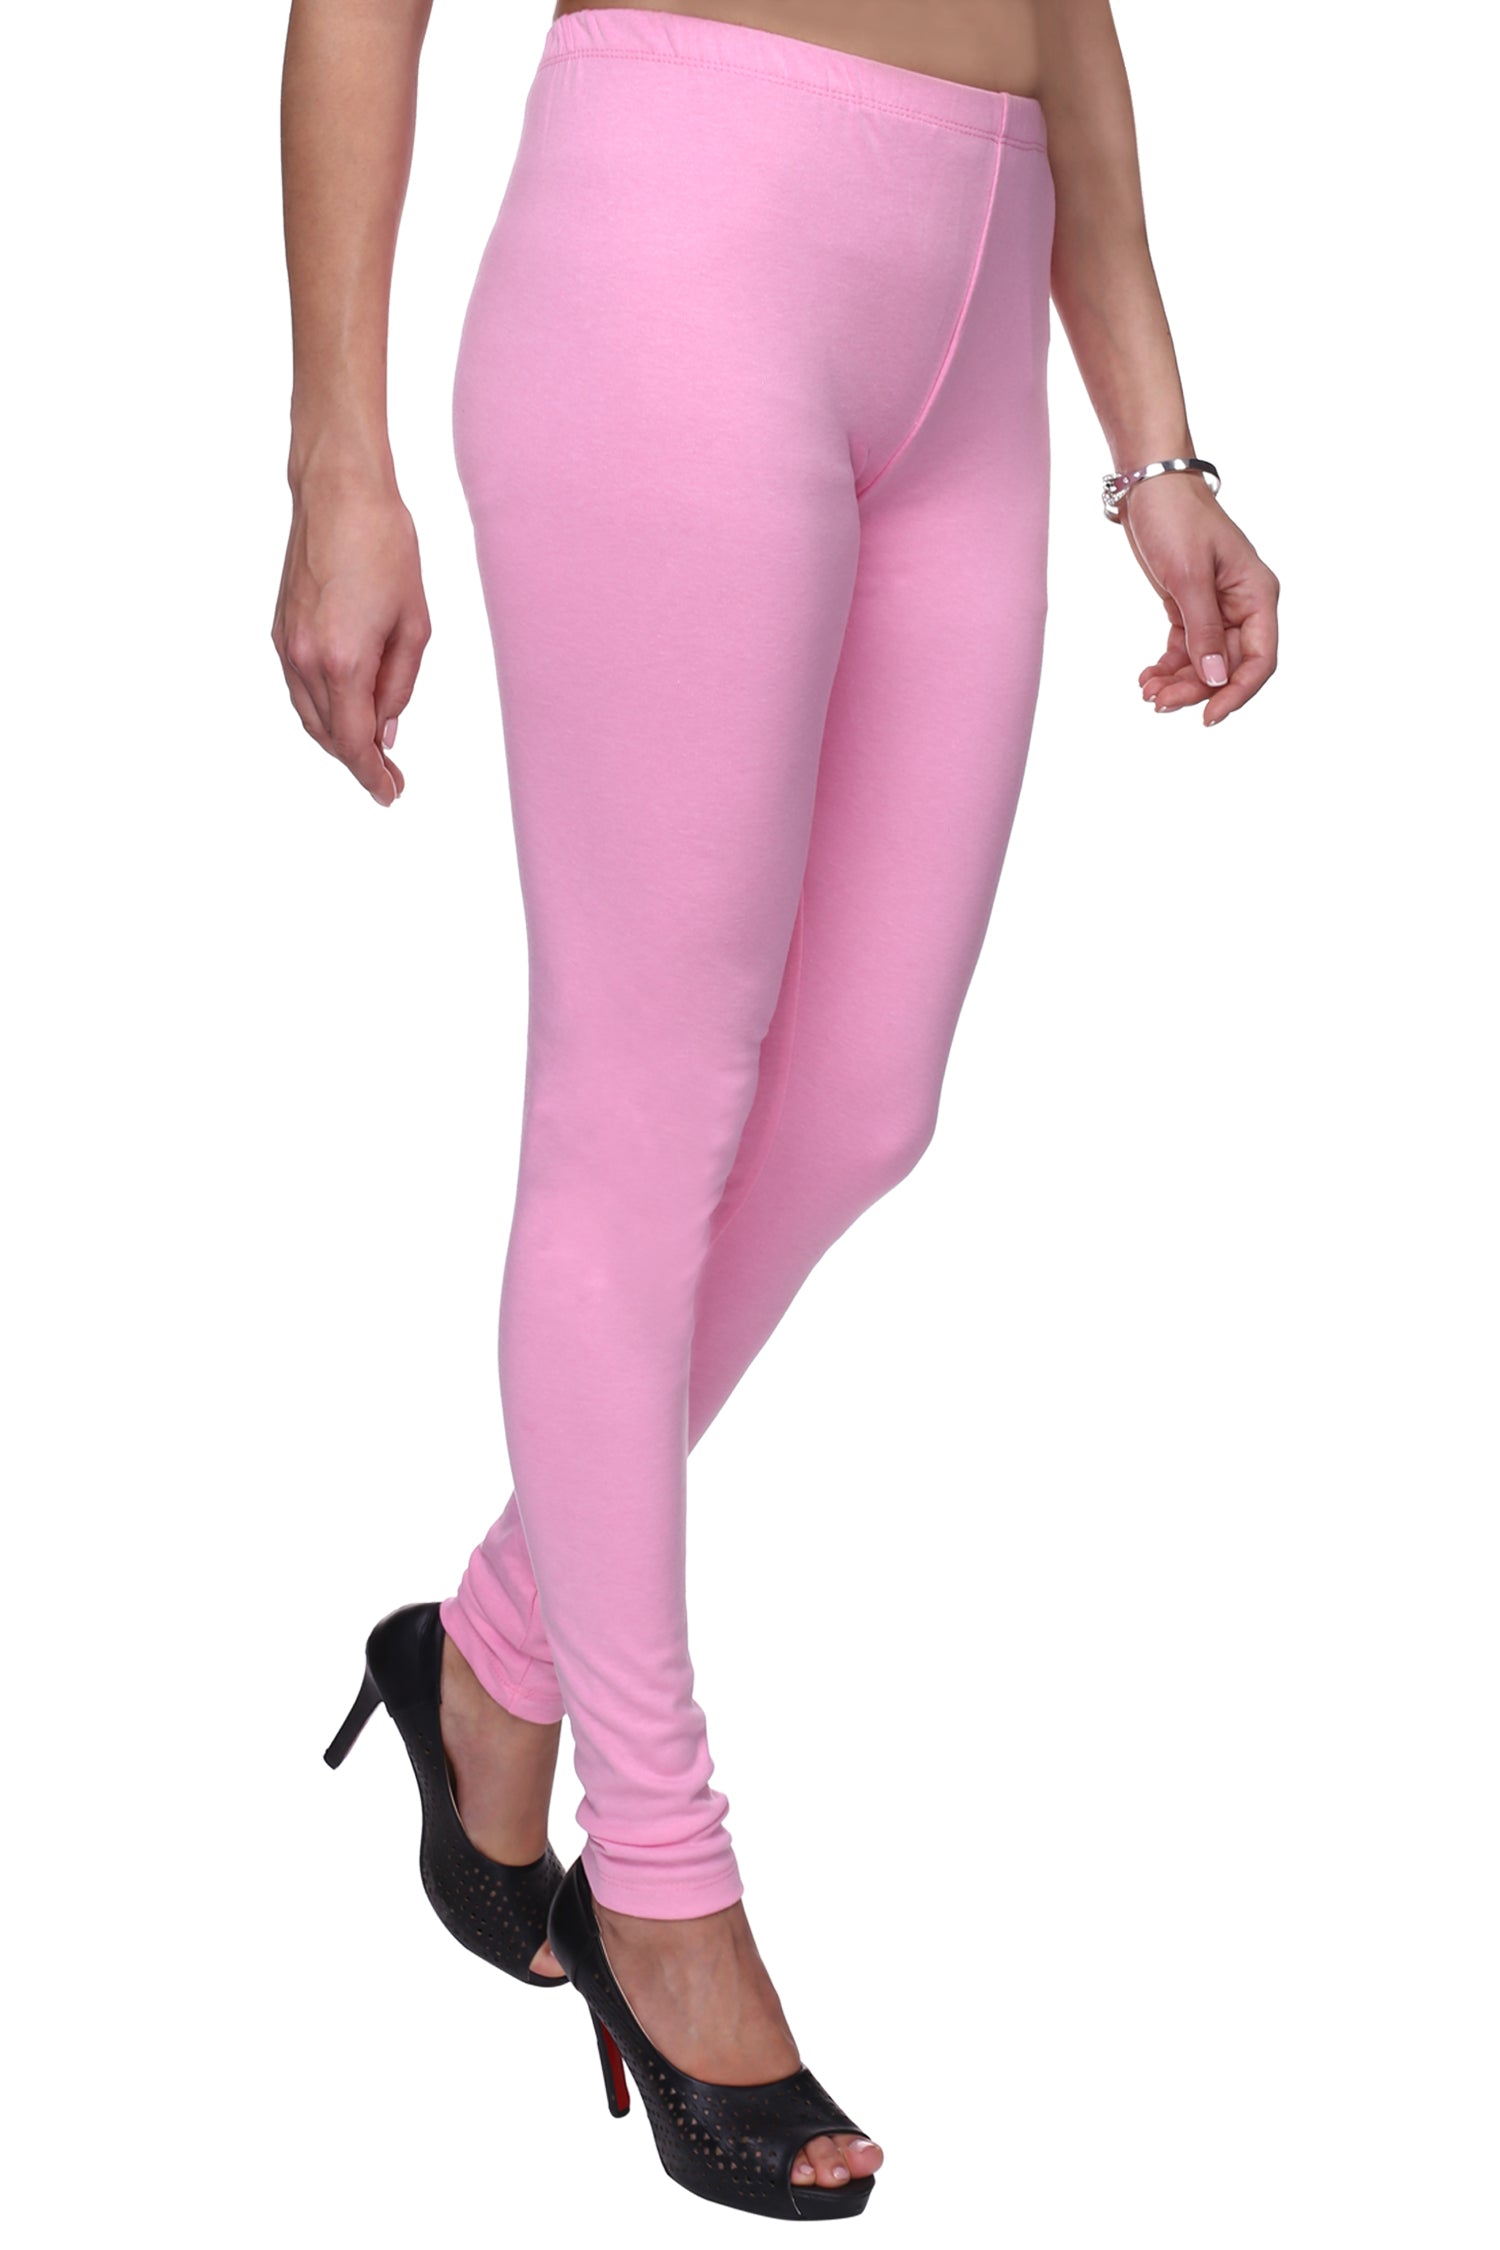 Cotton Churidar Leggings Price in India, Full Specifications & Offers |  DTashion.com